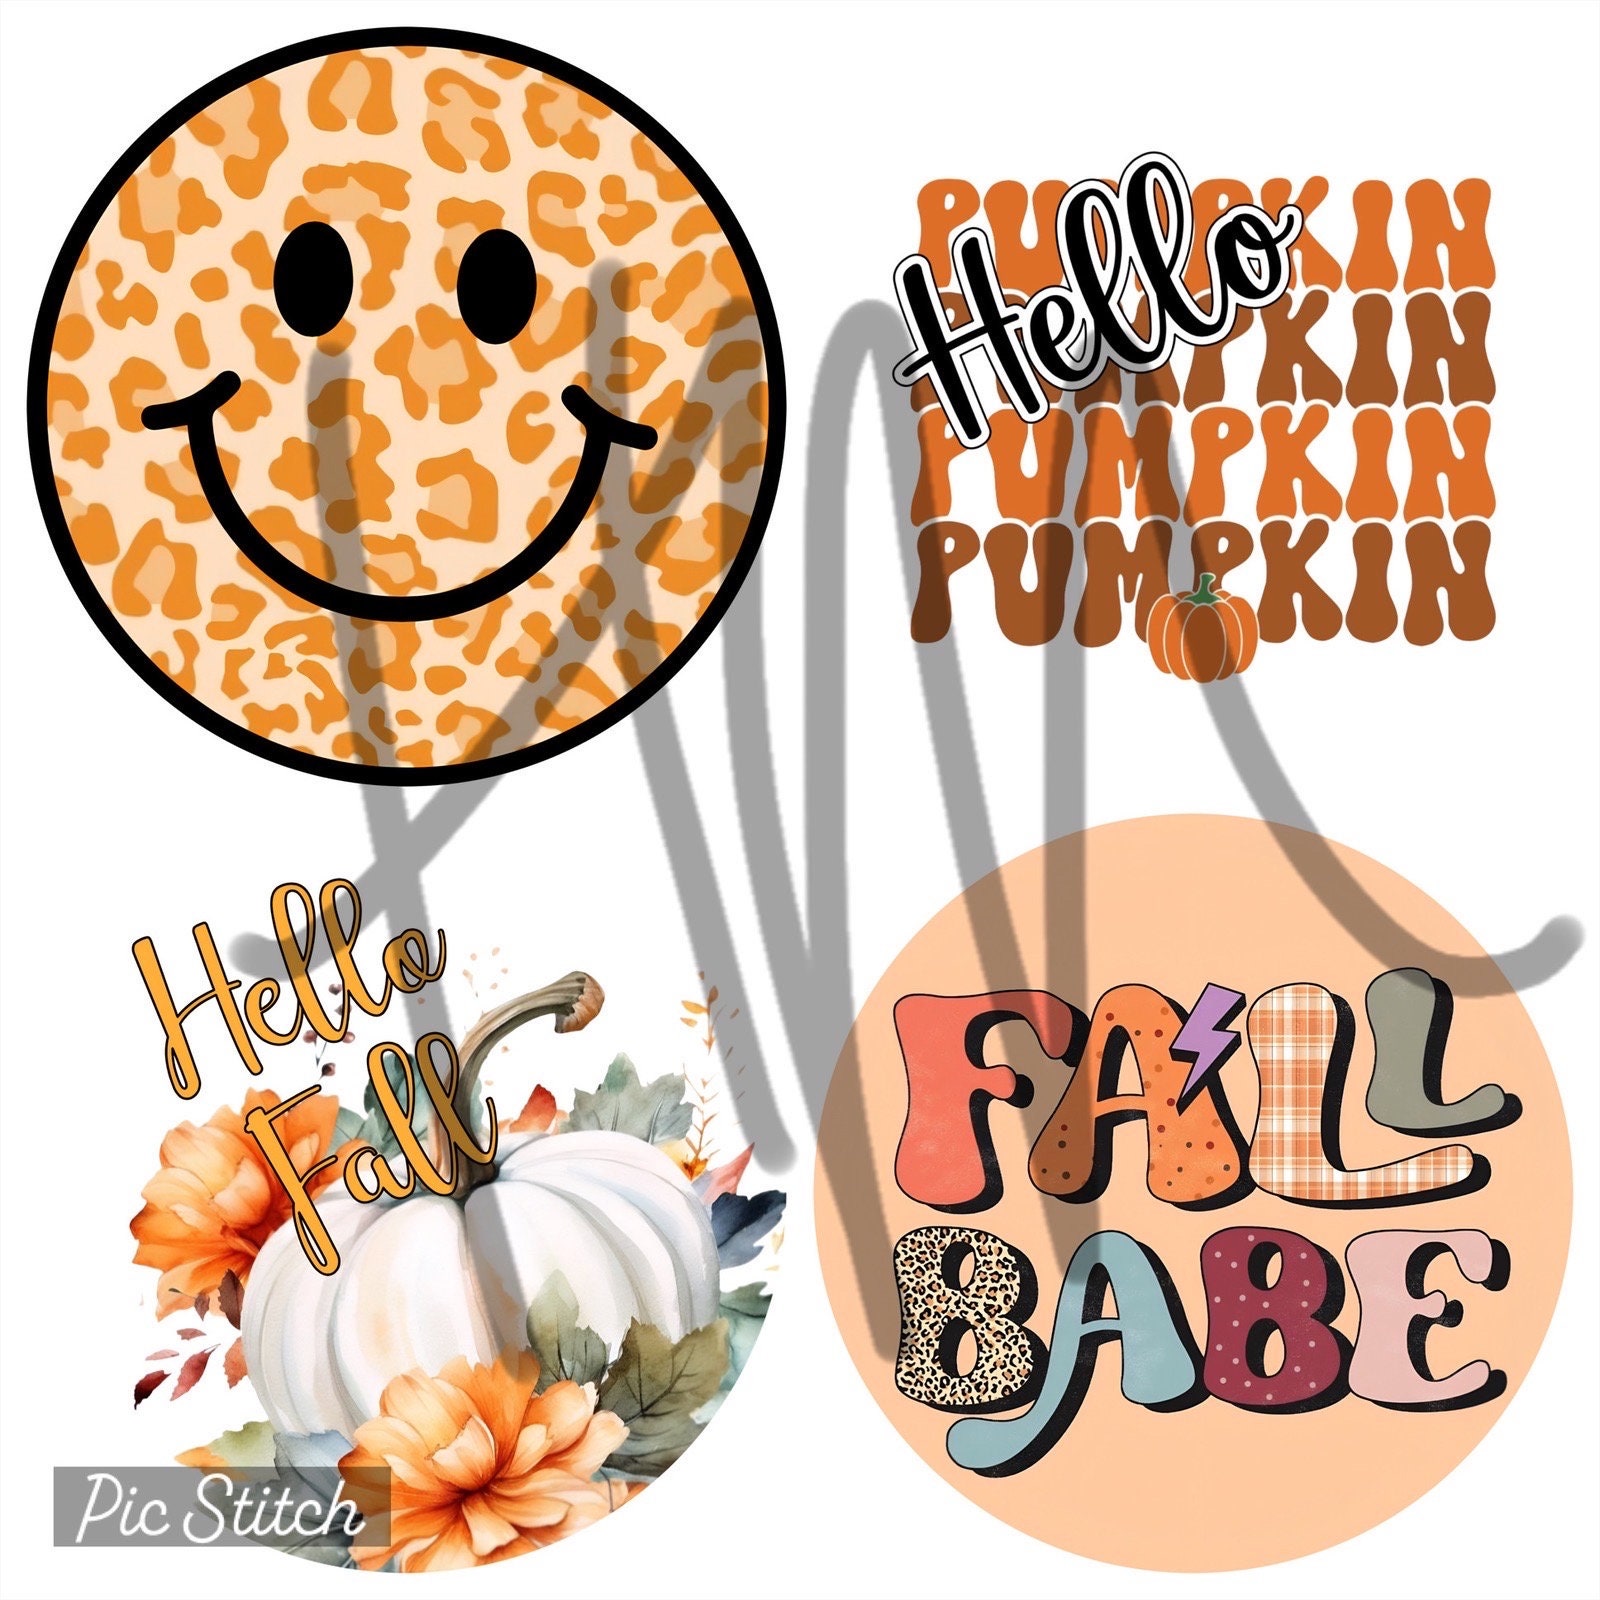 Freshie Cardstock Cut Out Rounds Circles Boujee Brands 3” Cutout Random Mixed 12 Pk Mom Life, Mama, Manly, Motorcycle, Pumpkin Spice Latte Bake with